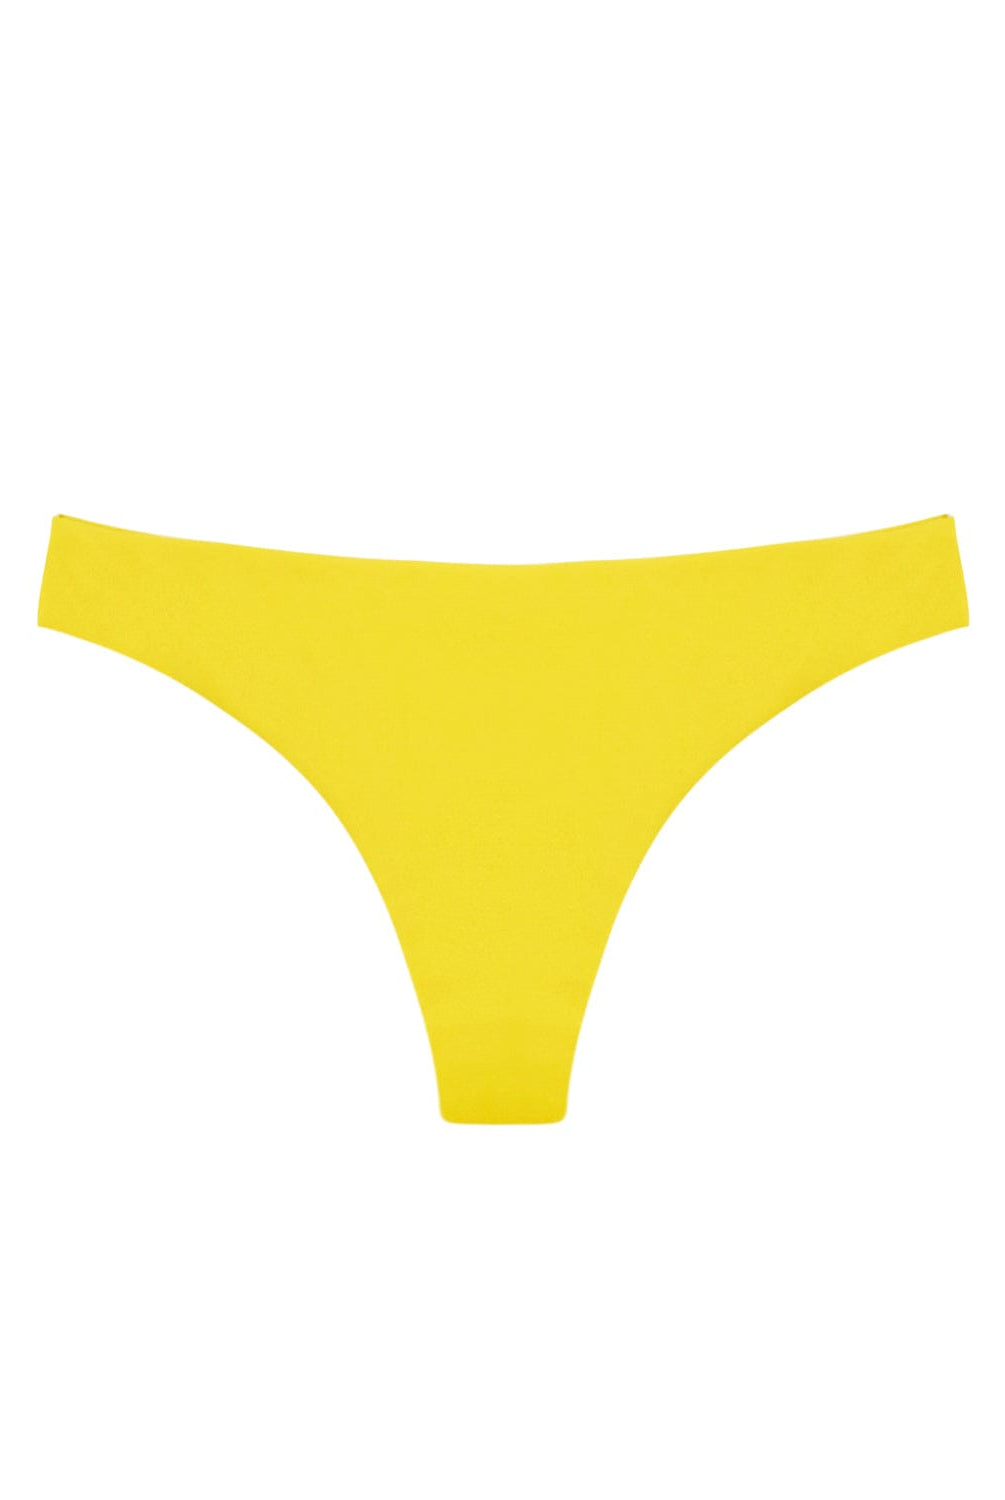 A yellow ruched bikini bottom. Featured against a white wall background.